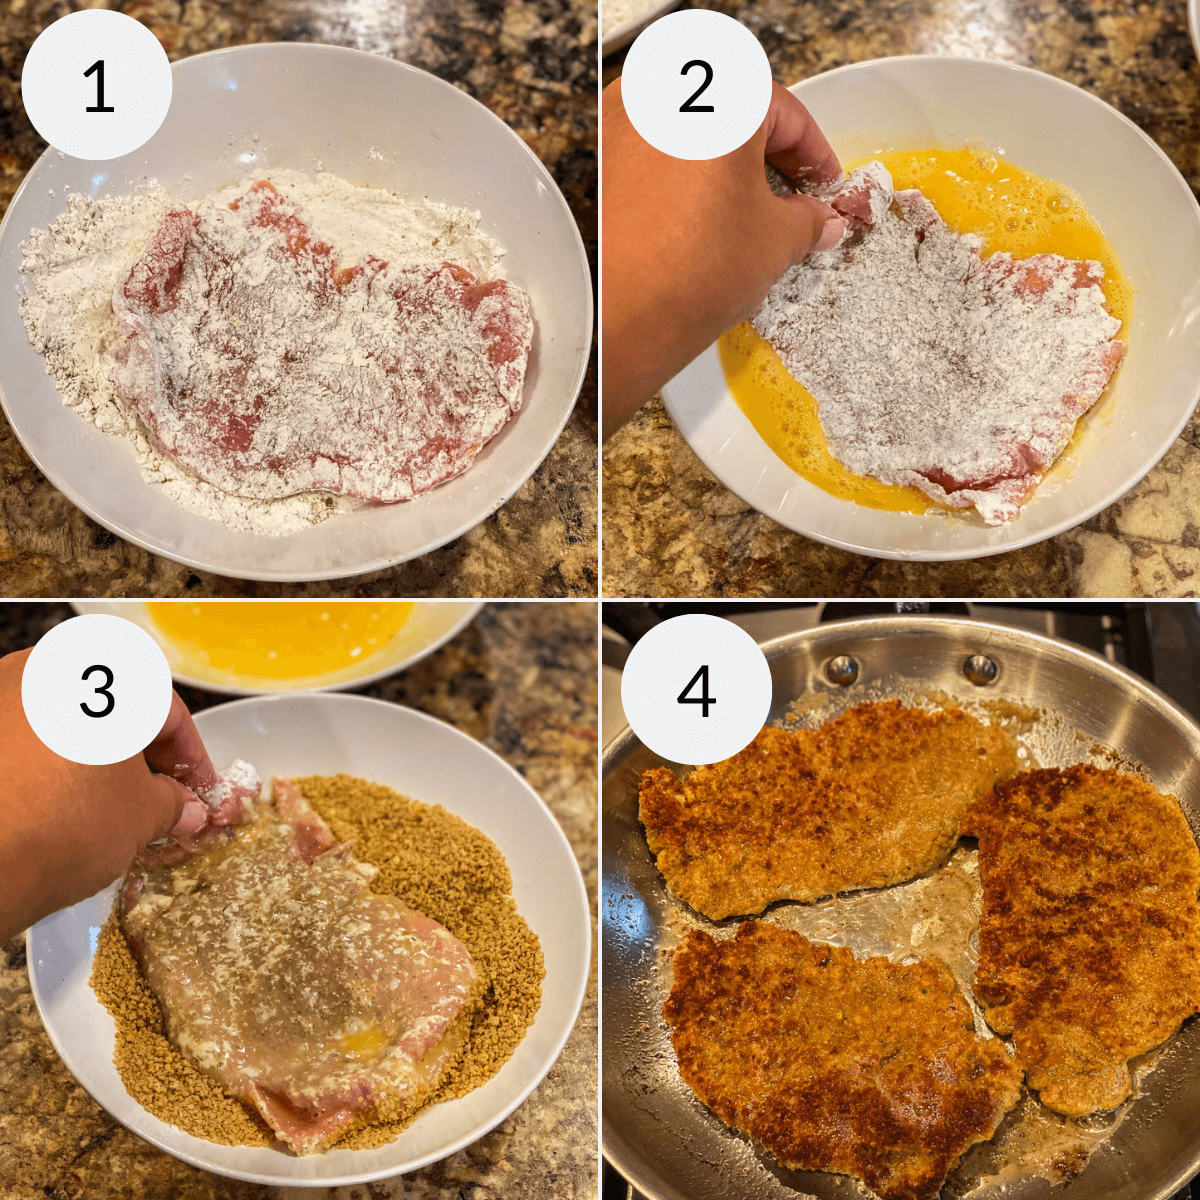 Doing the coating process of flour, egg then breadcrumb and then baked.